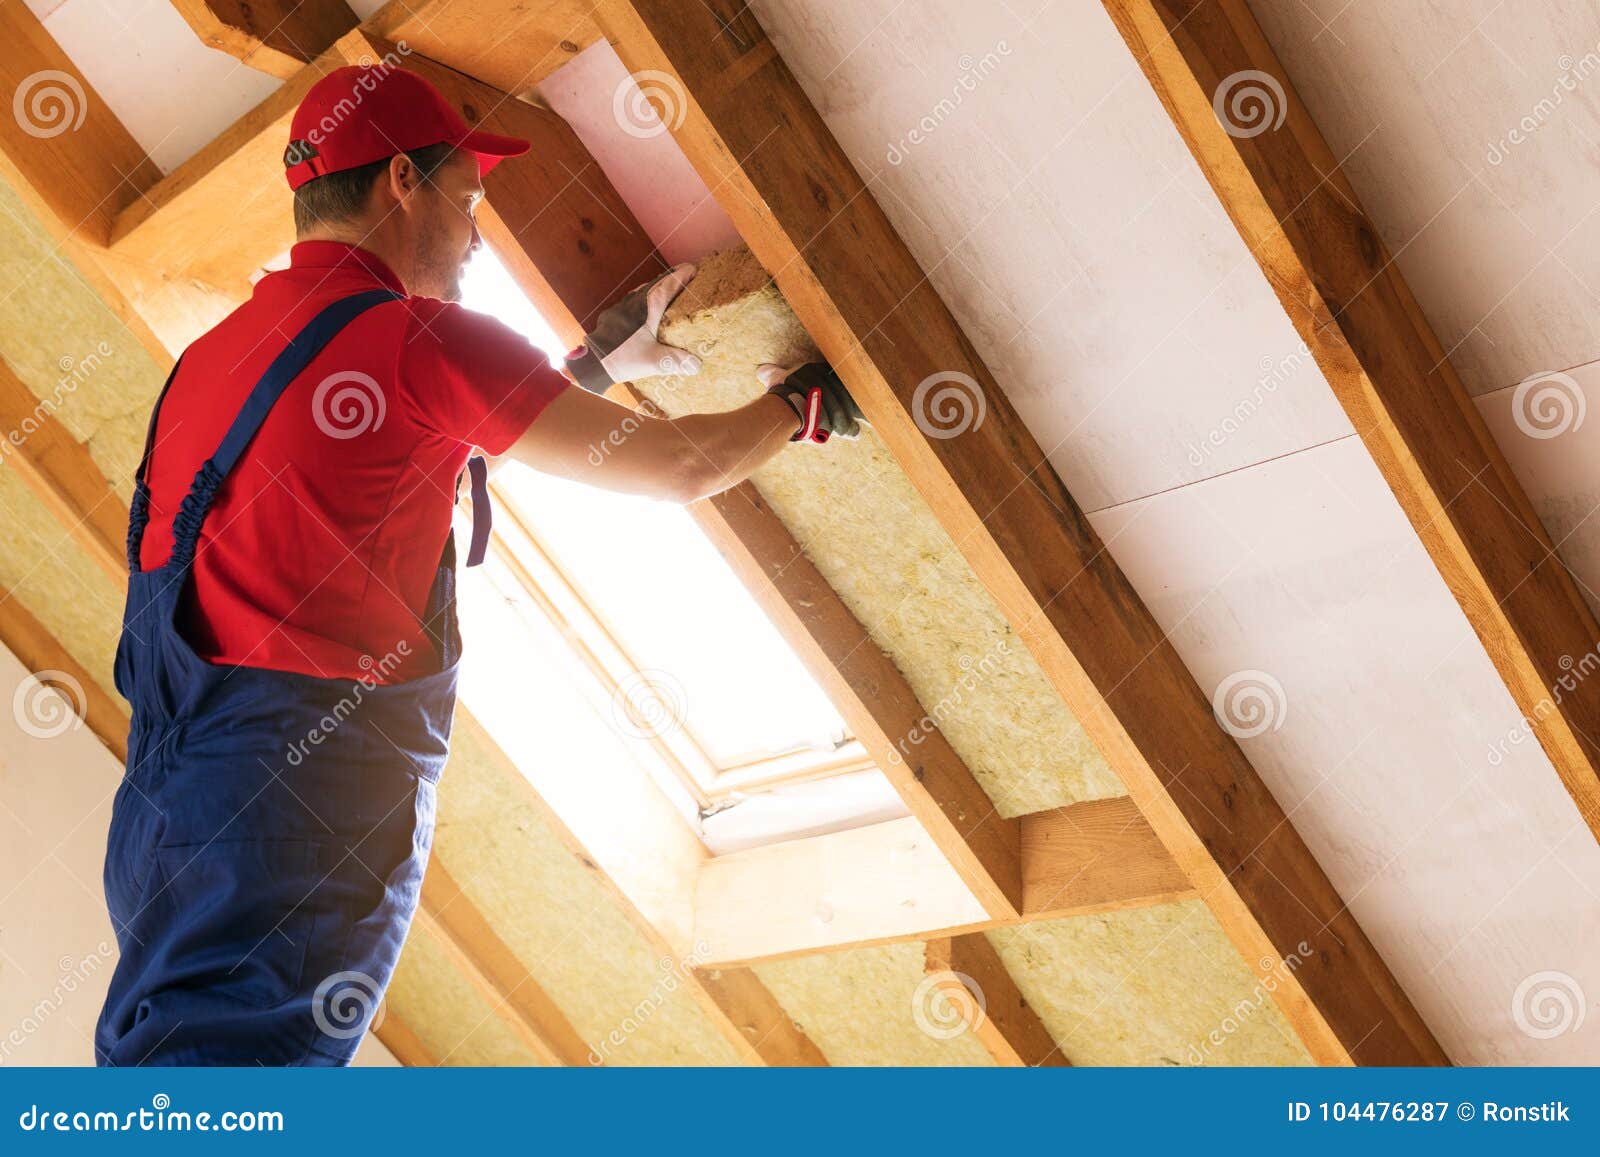 house attic insulation - construction worker installing wool